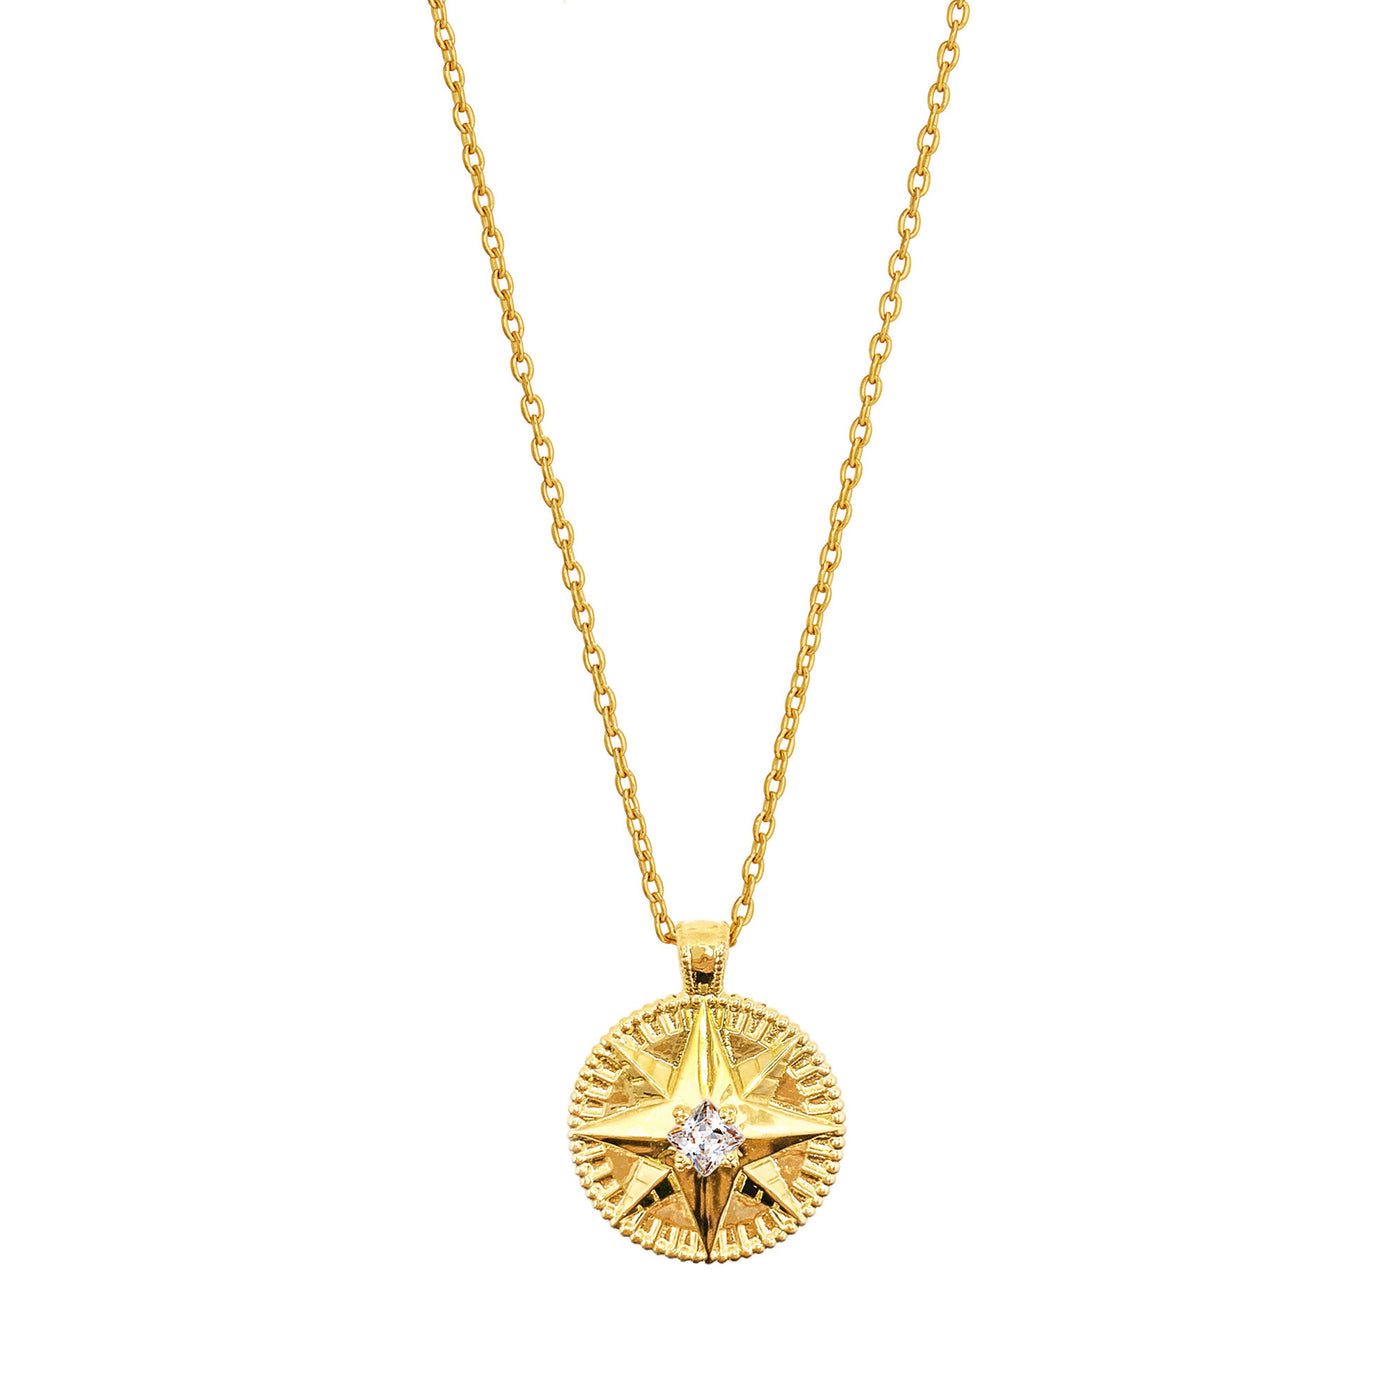 Gold 3D star coin necklace with CZ crystal